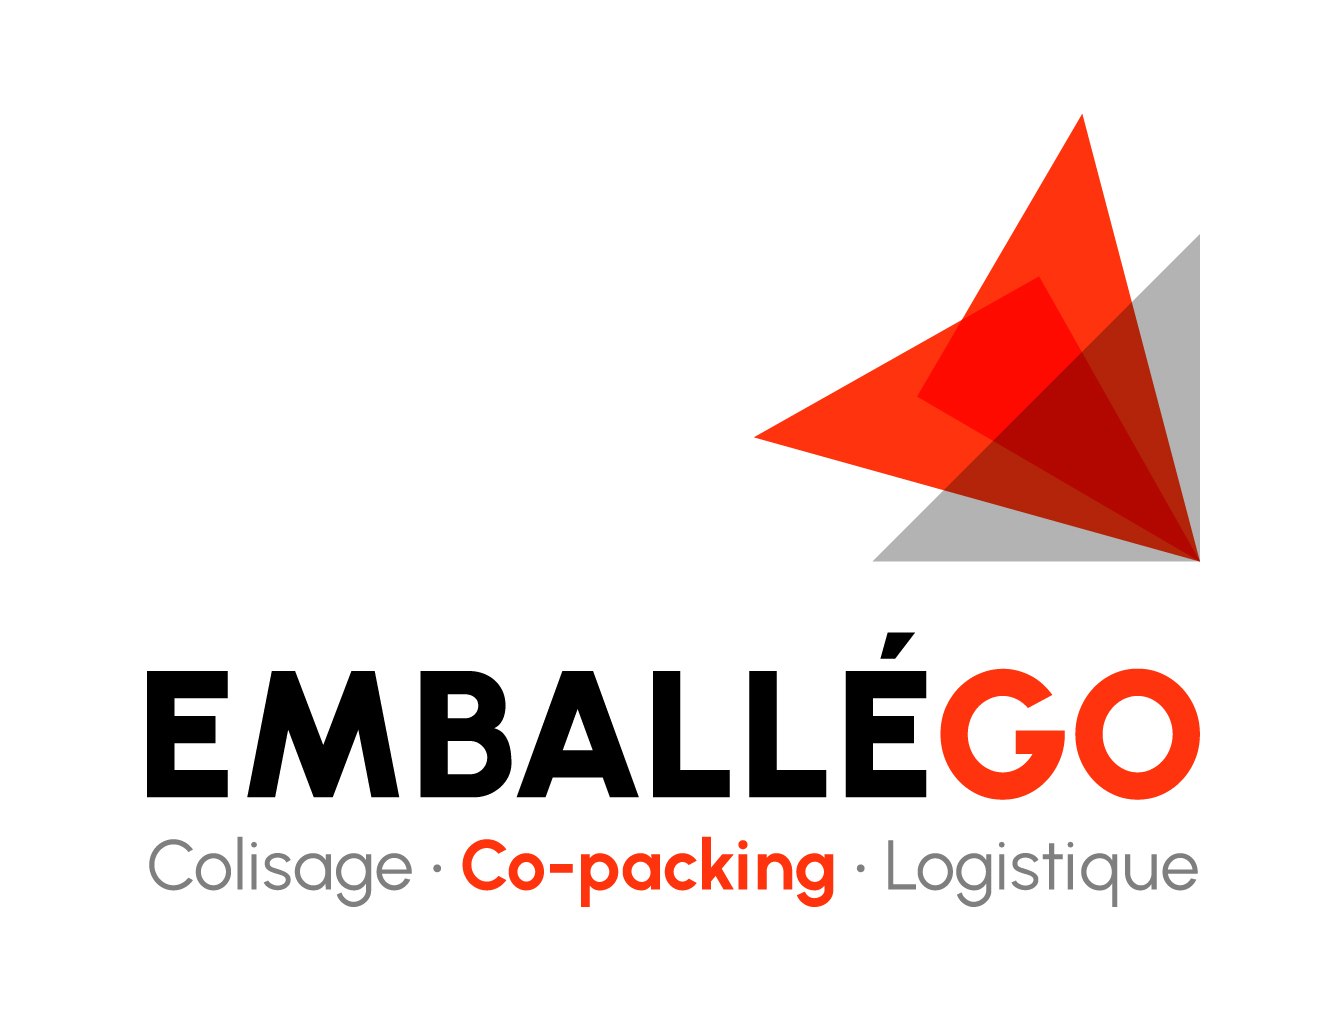 CO-PACKING